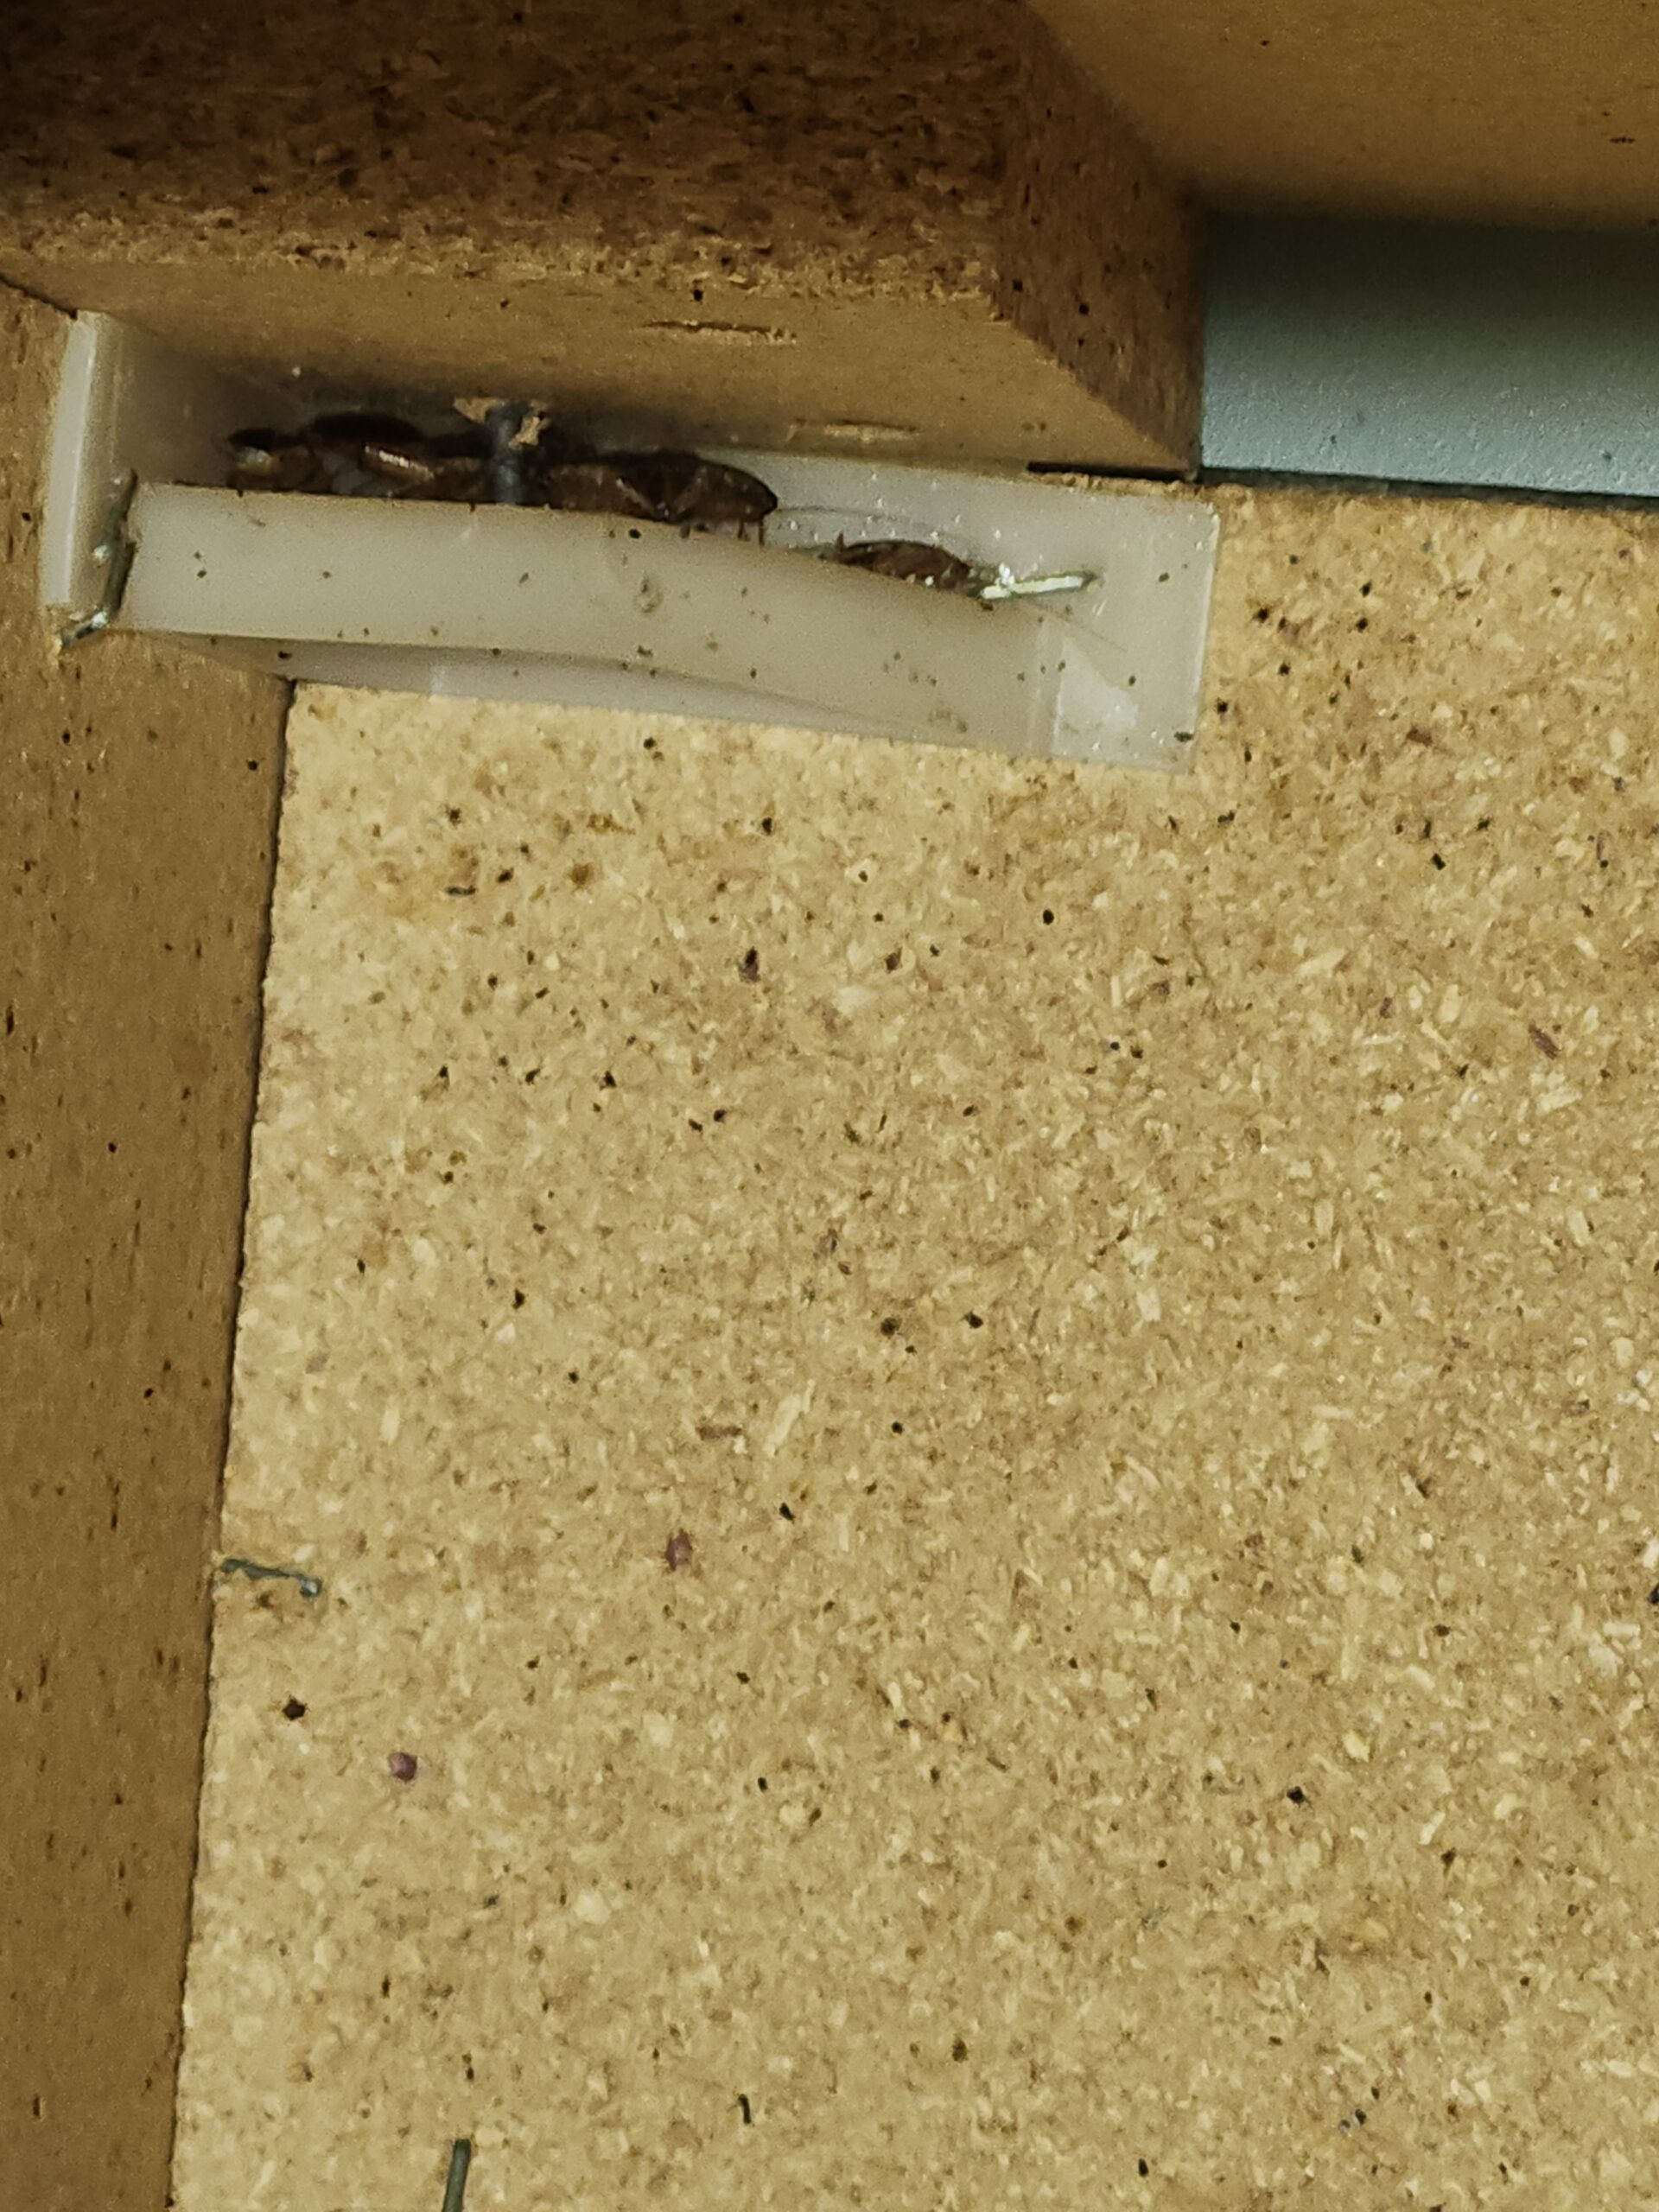 Roaches inside cabinets